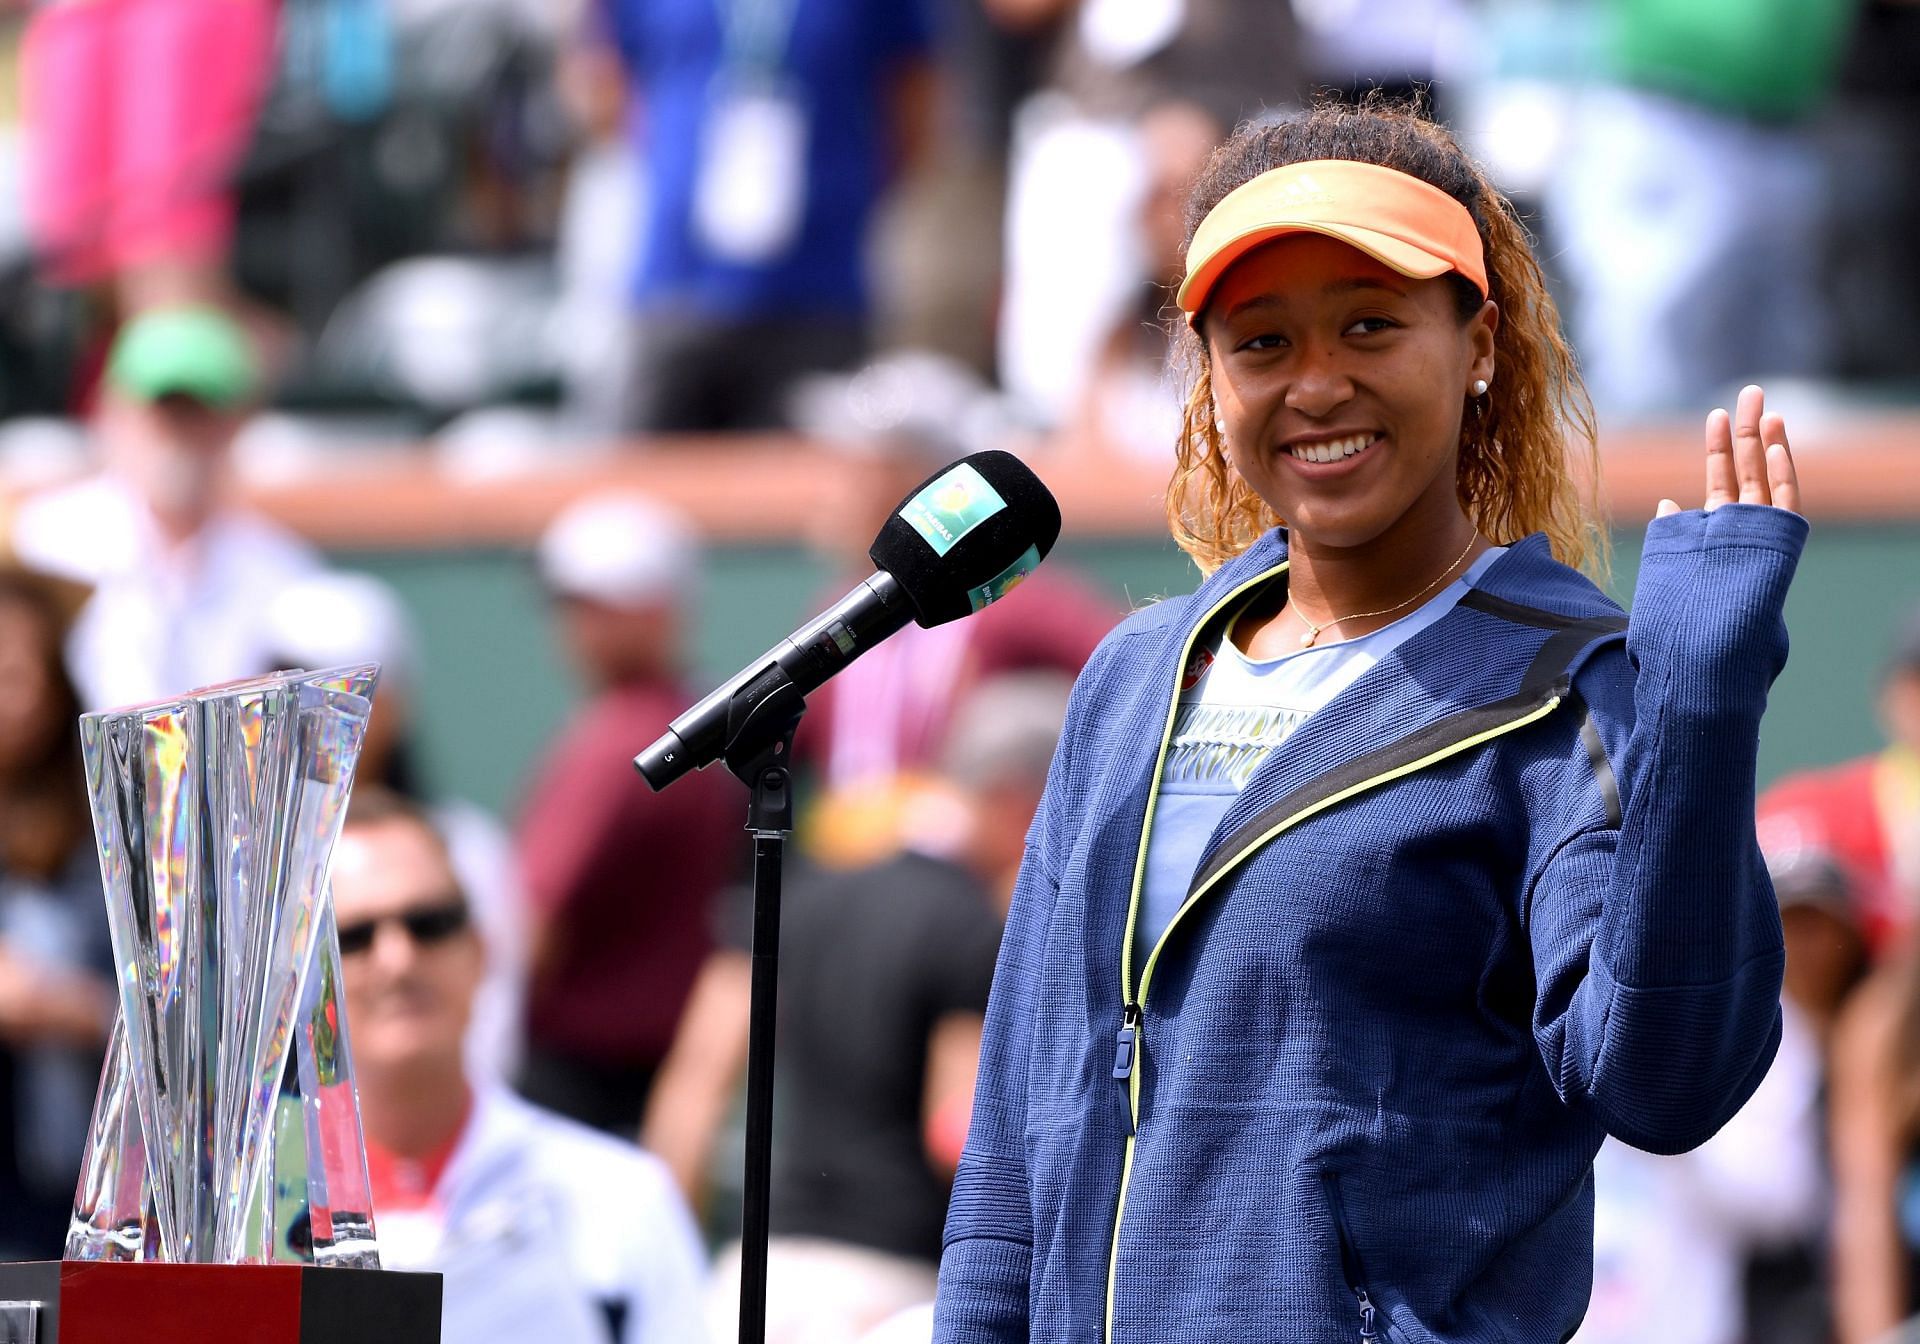 Naomi Osaka will be playing at the Eisenhower Cup exhibition tournament.